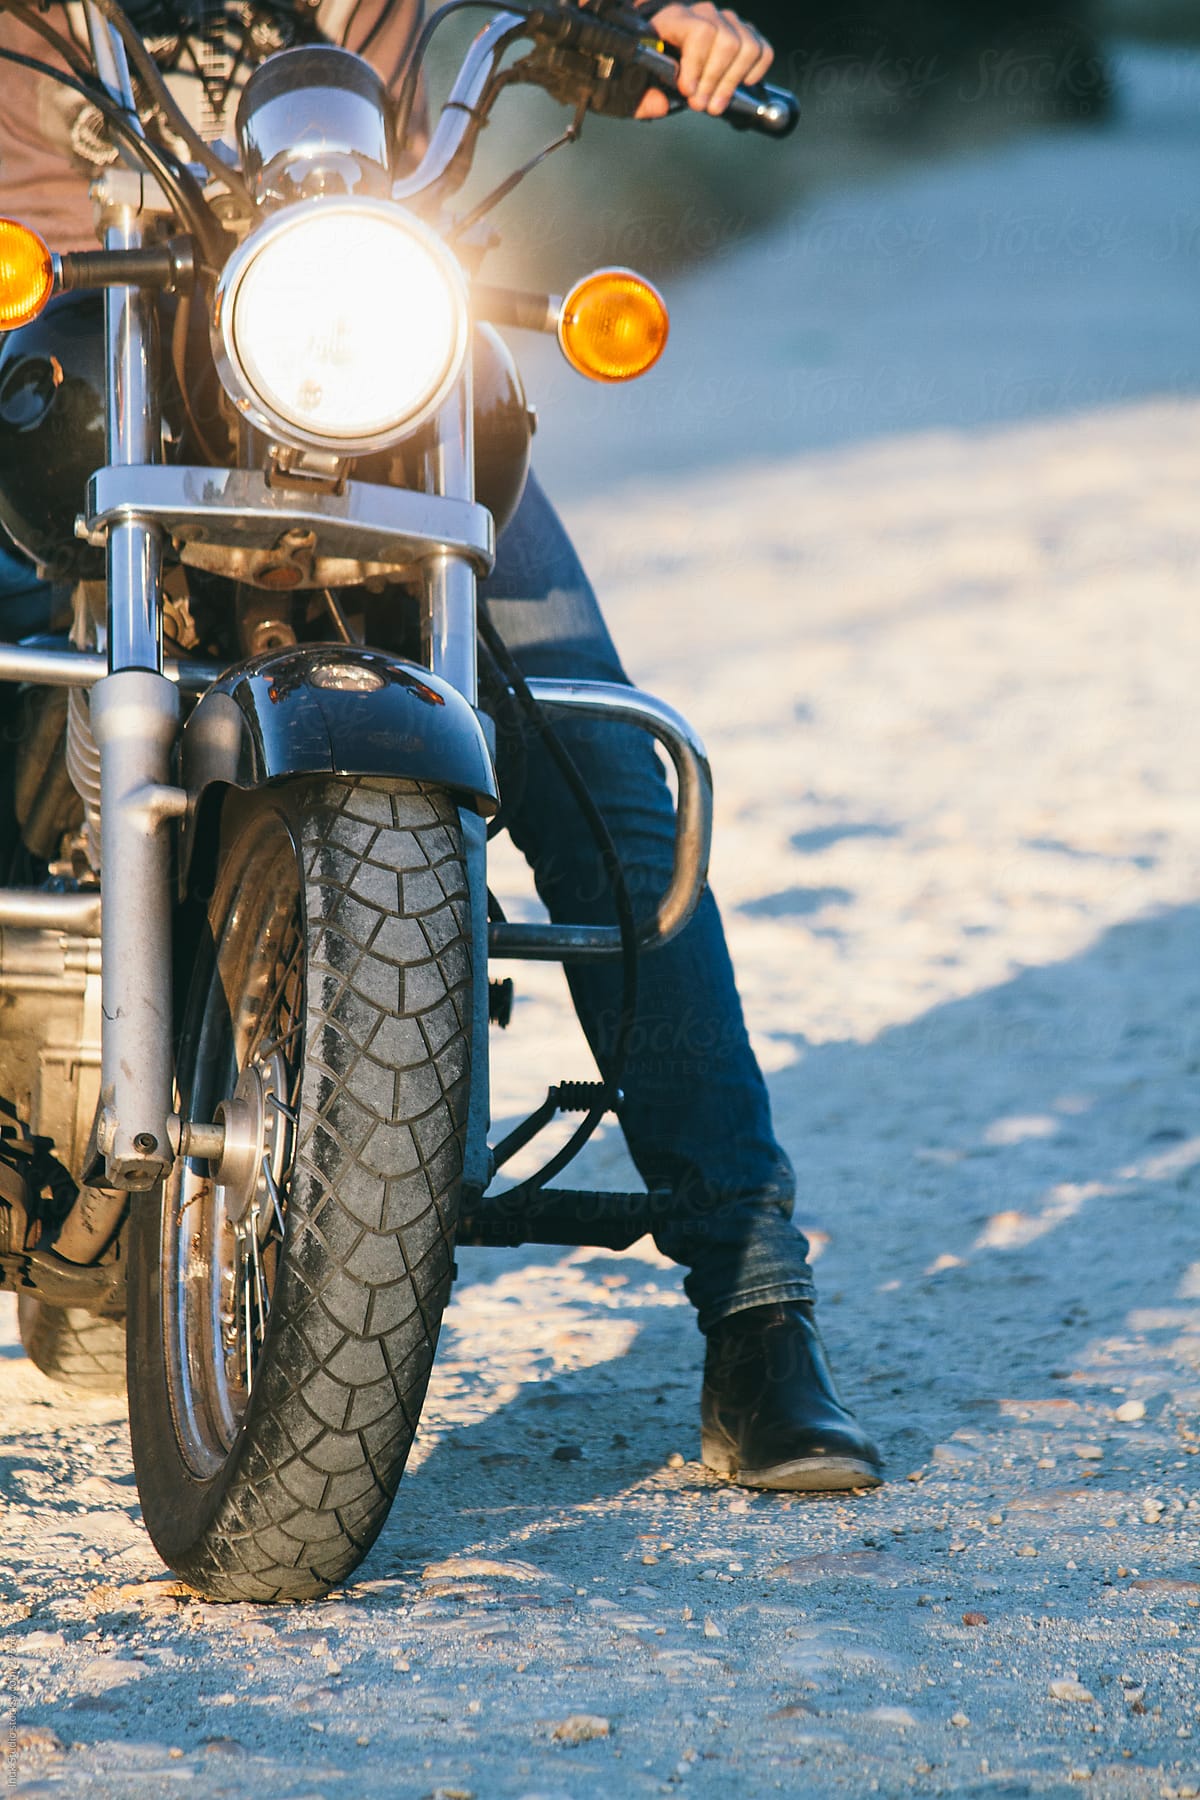 Man riding a motorbike on a dirt road - Close up shot of the front of the motorbike and leg